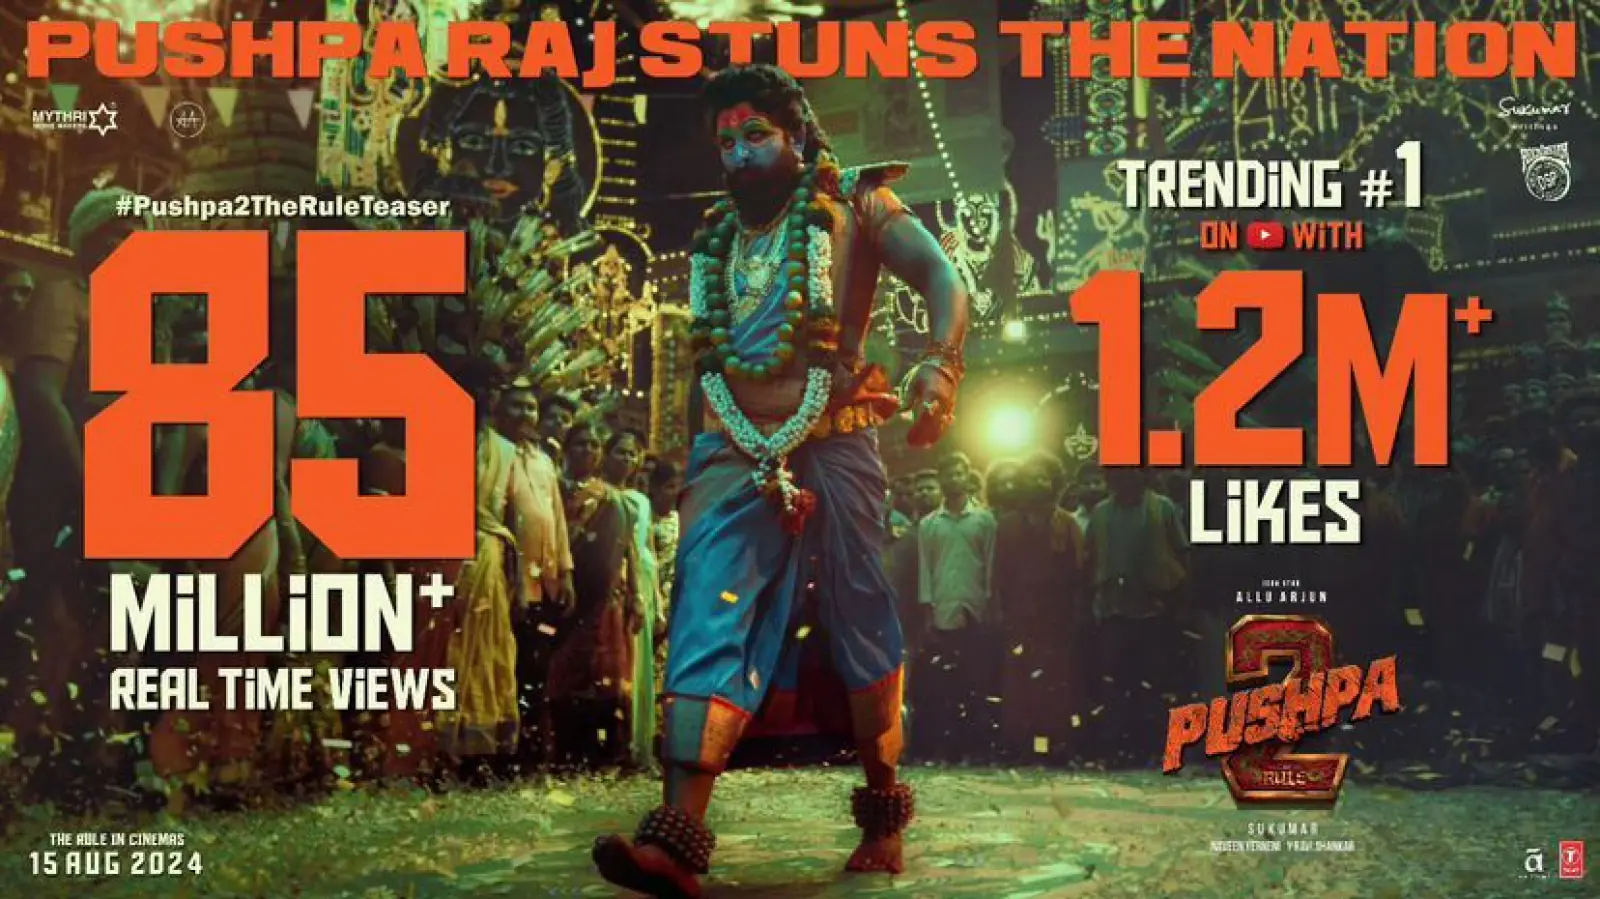 'PUSHPA 2: THE RULE' Teaser Sets the Internet Ablaze, Trending at #1 with 85 Million Views